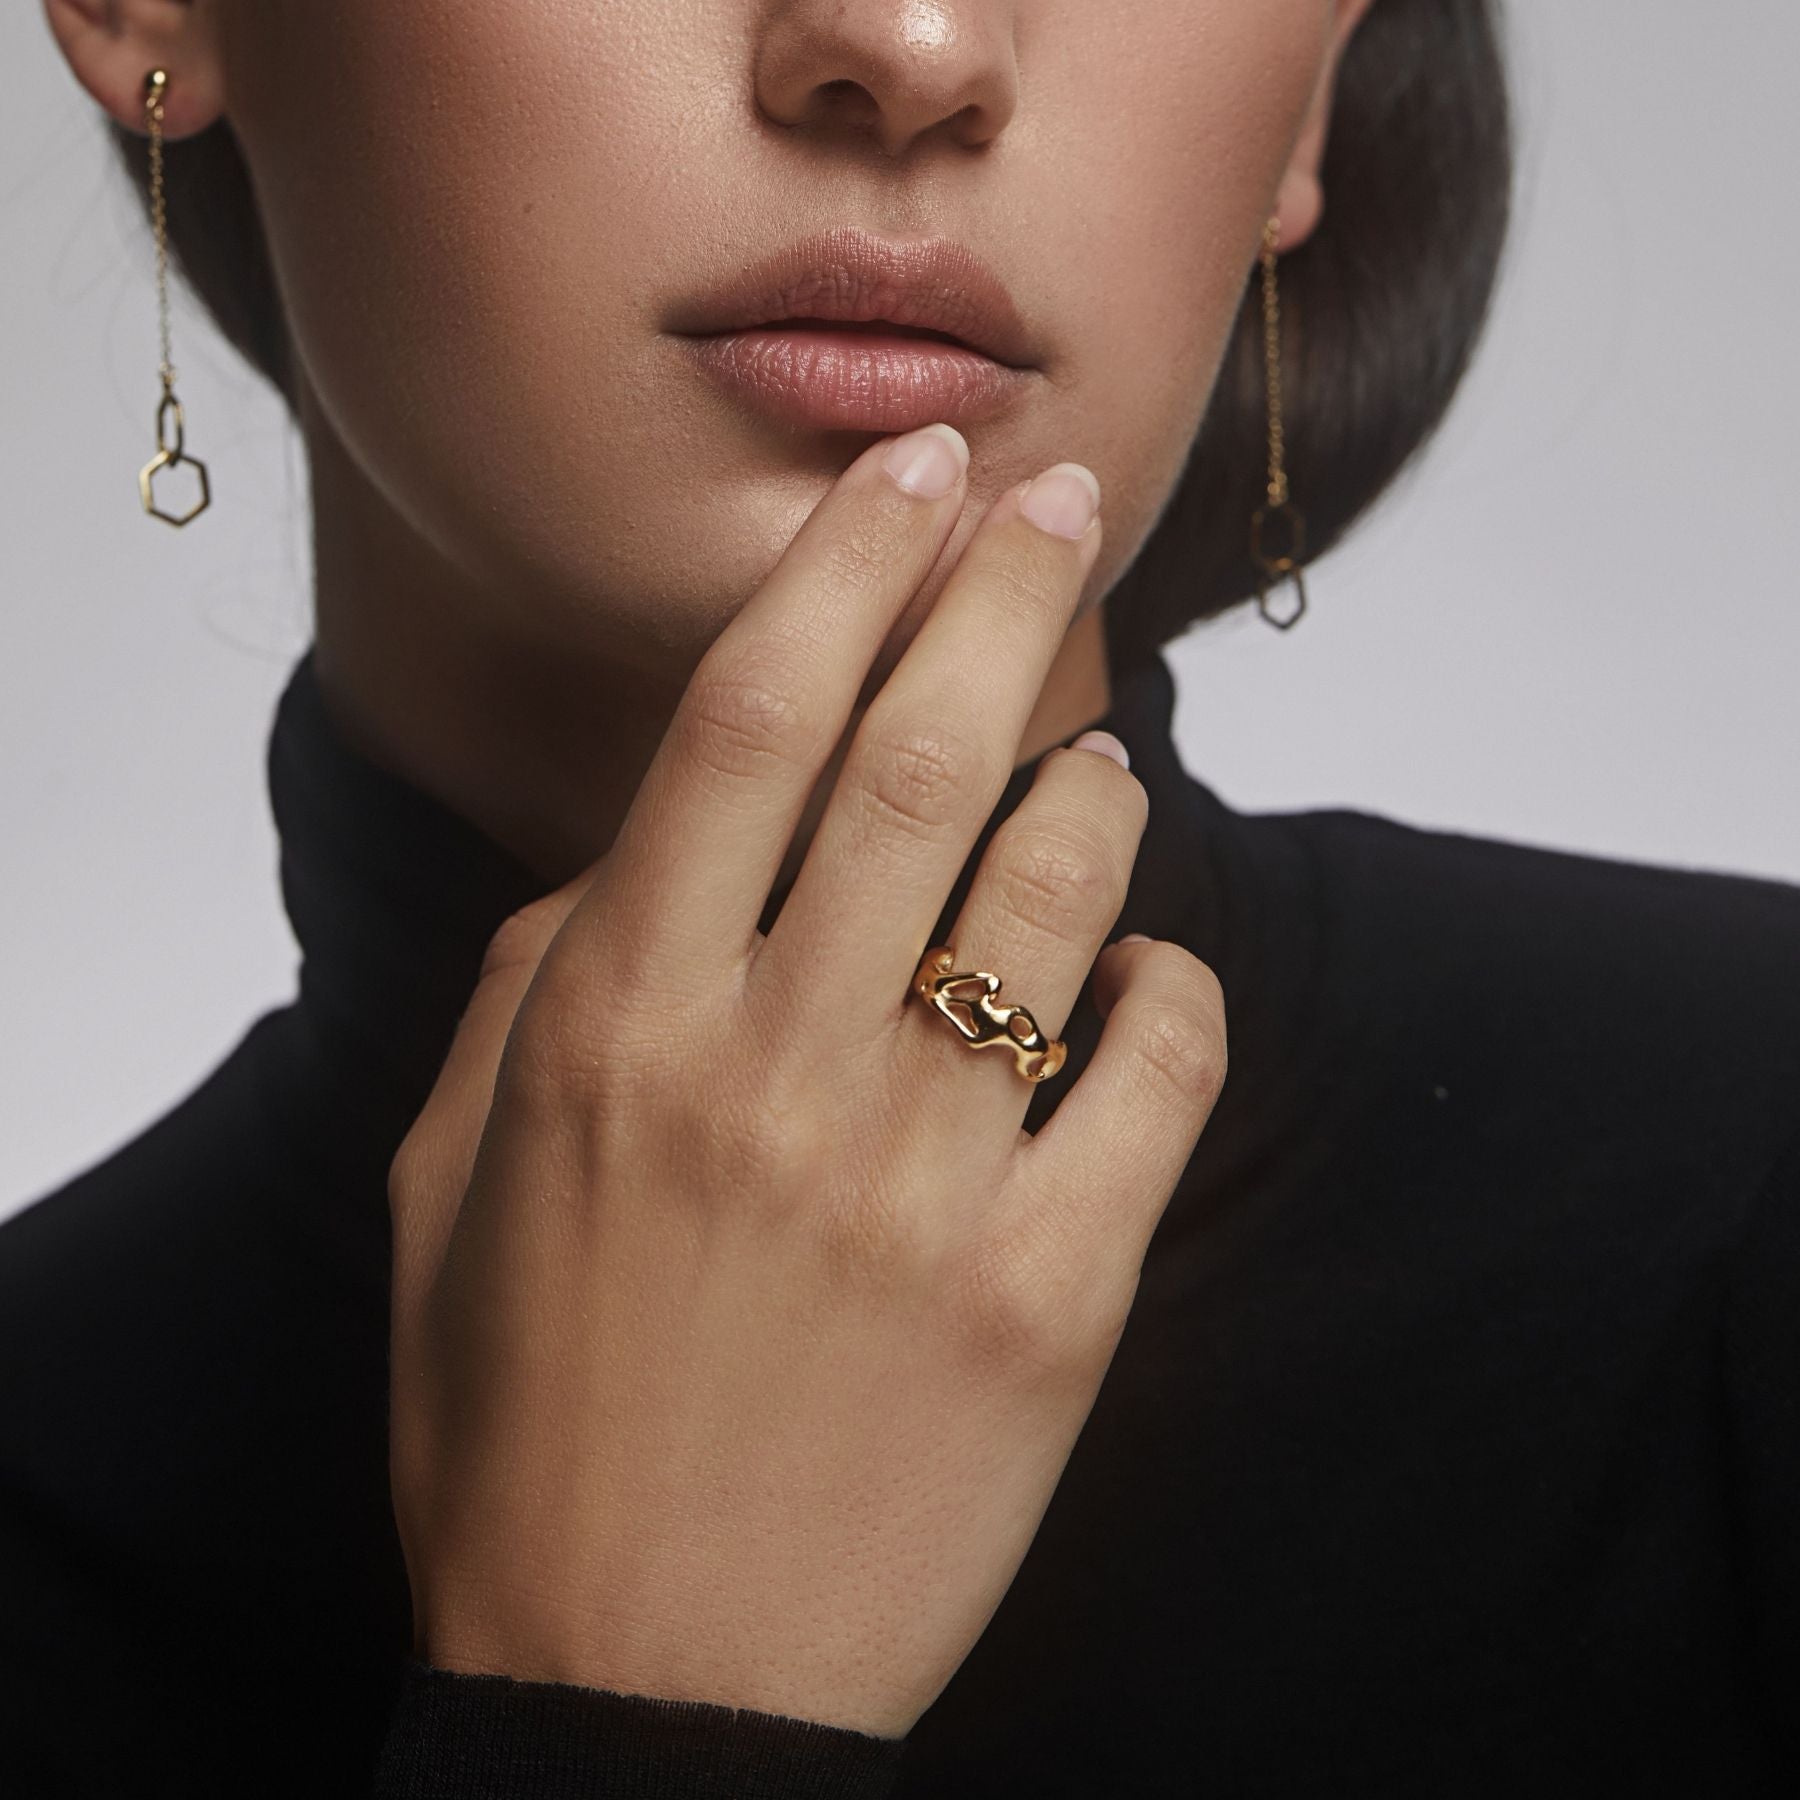 Abstract, squiggle ring band in 18k gold vermeil.